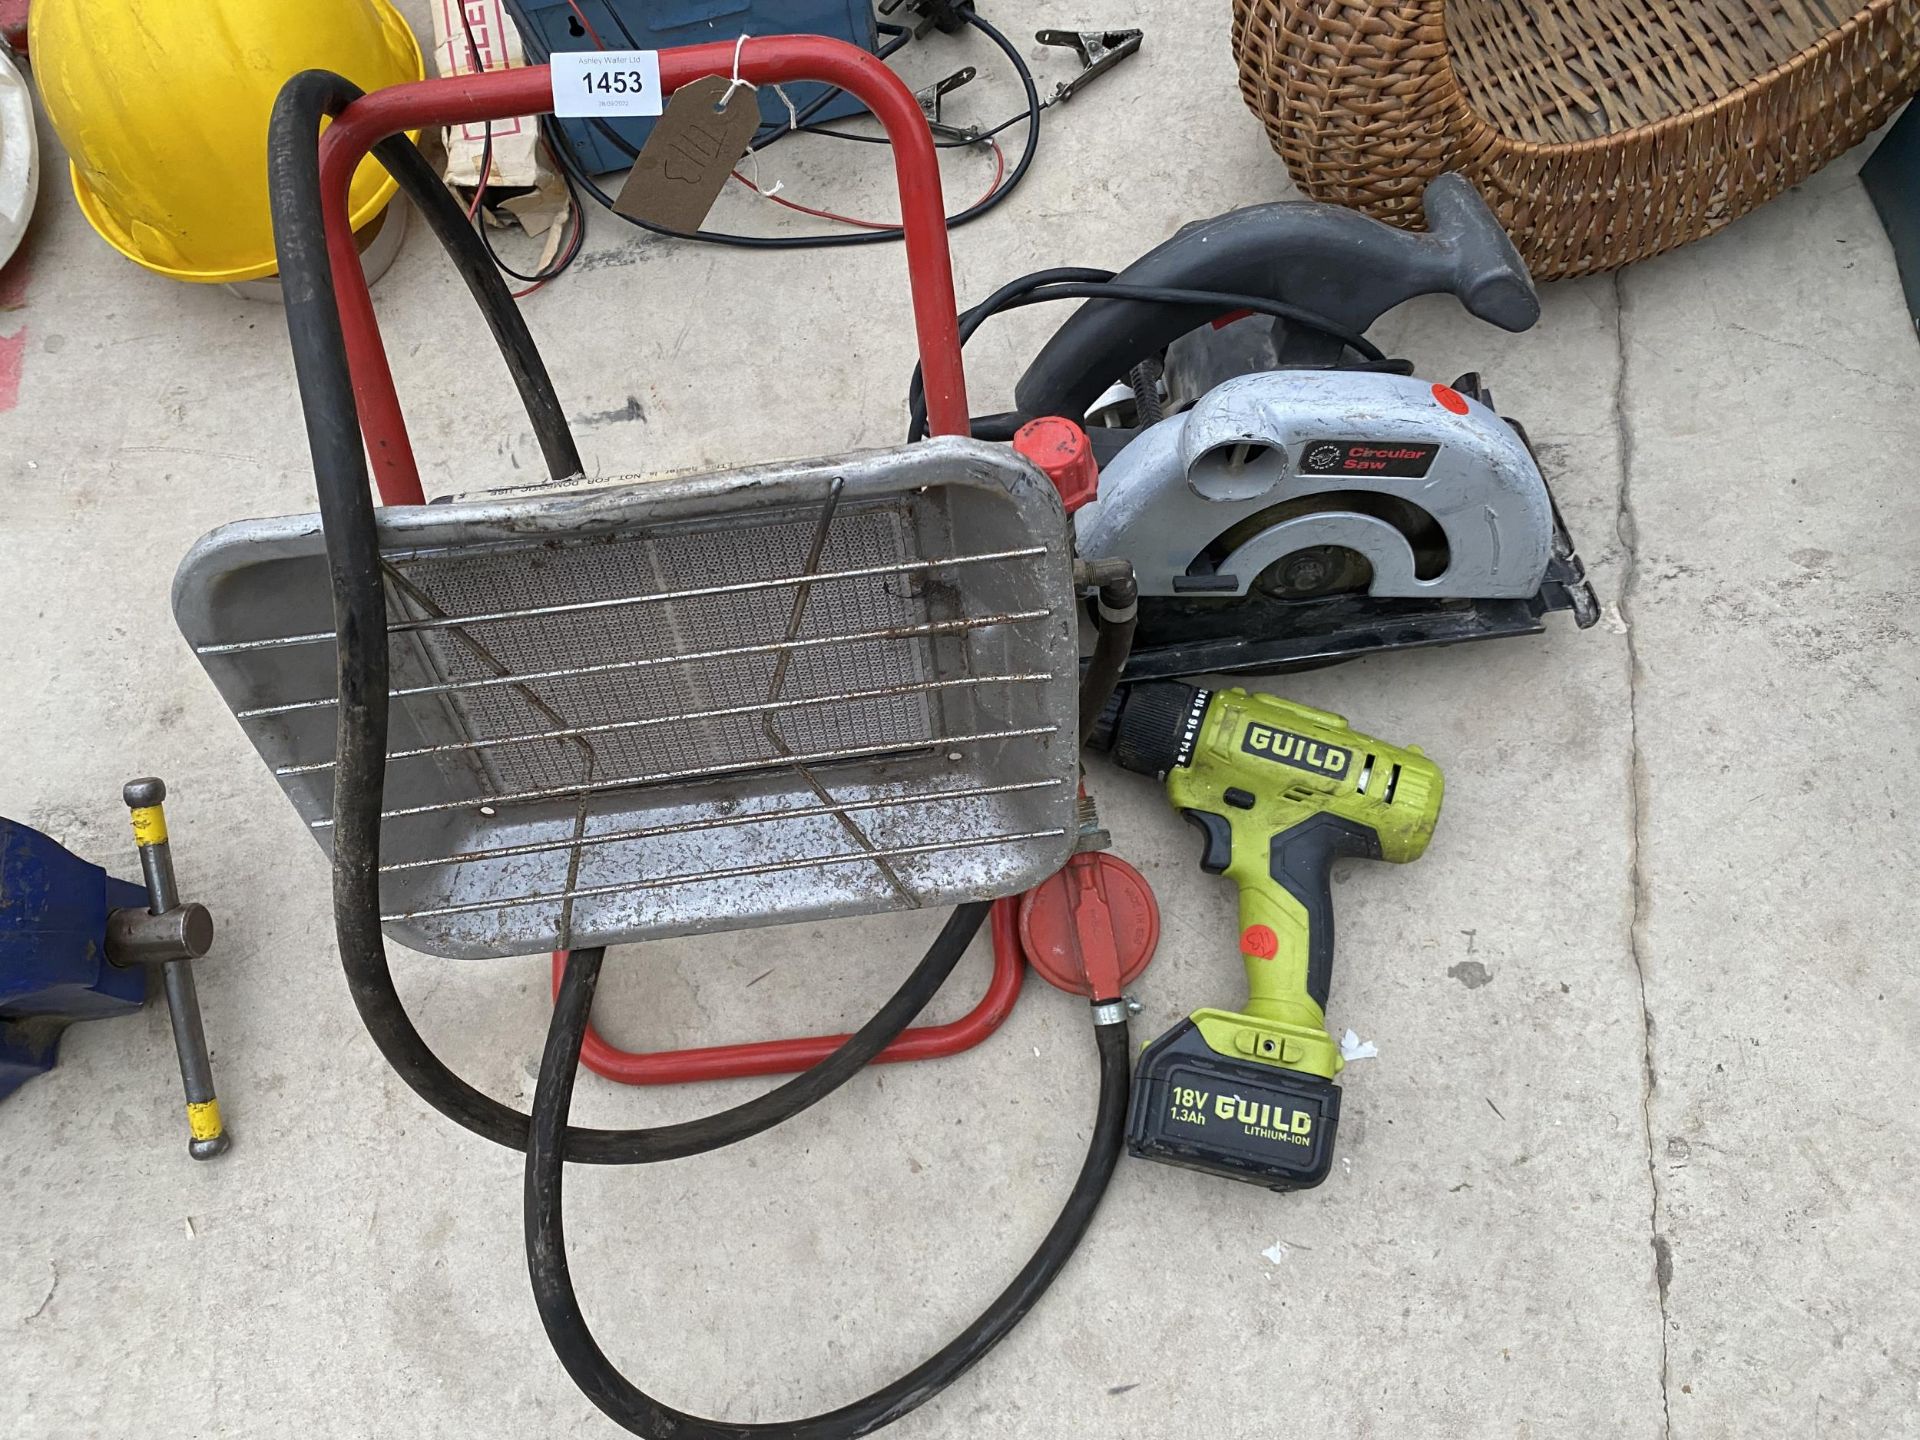 A GAS HEATER, AN ELECTRIC CIRCULAR SAW AND A GUILD BATTERY DRILL